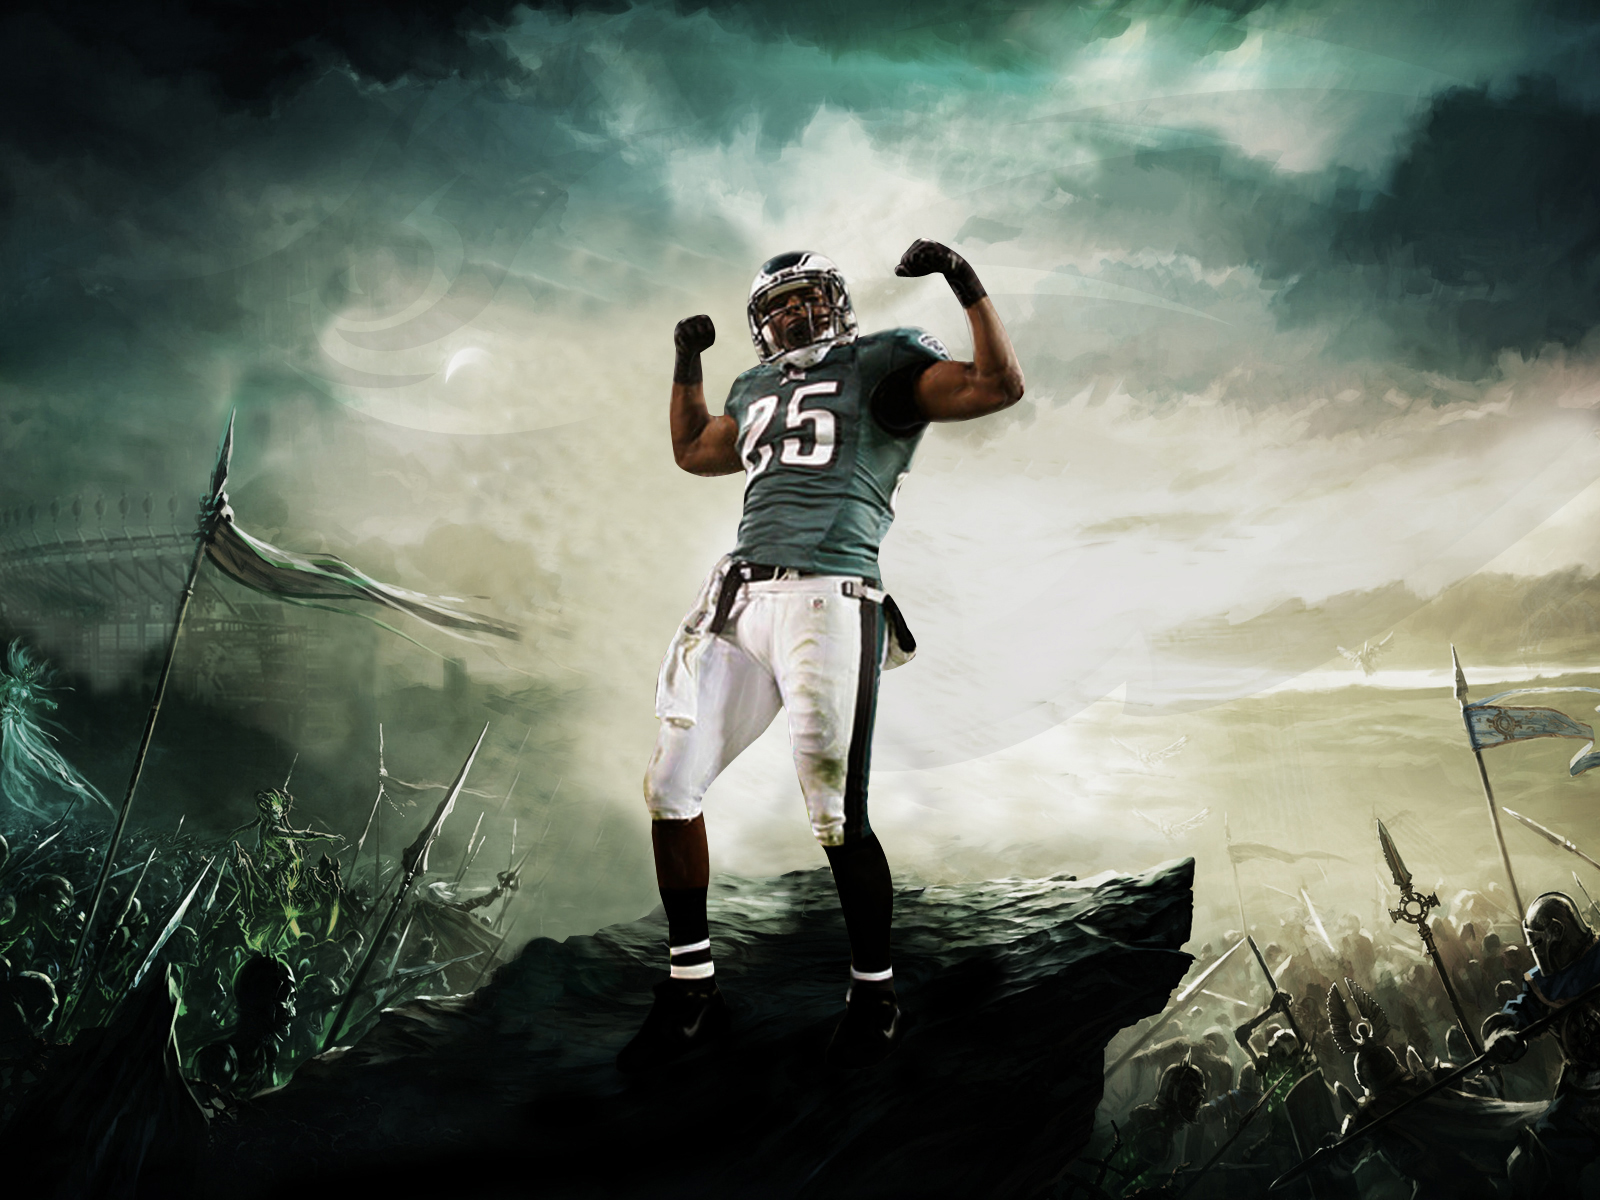 Wallpaper Background More New Lesean Shady Mccoy